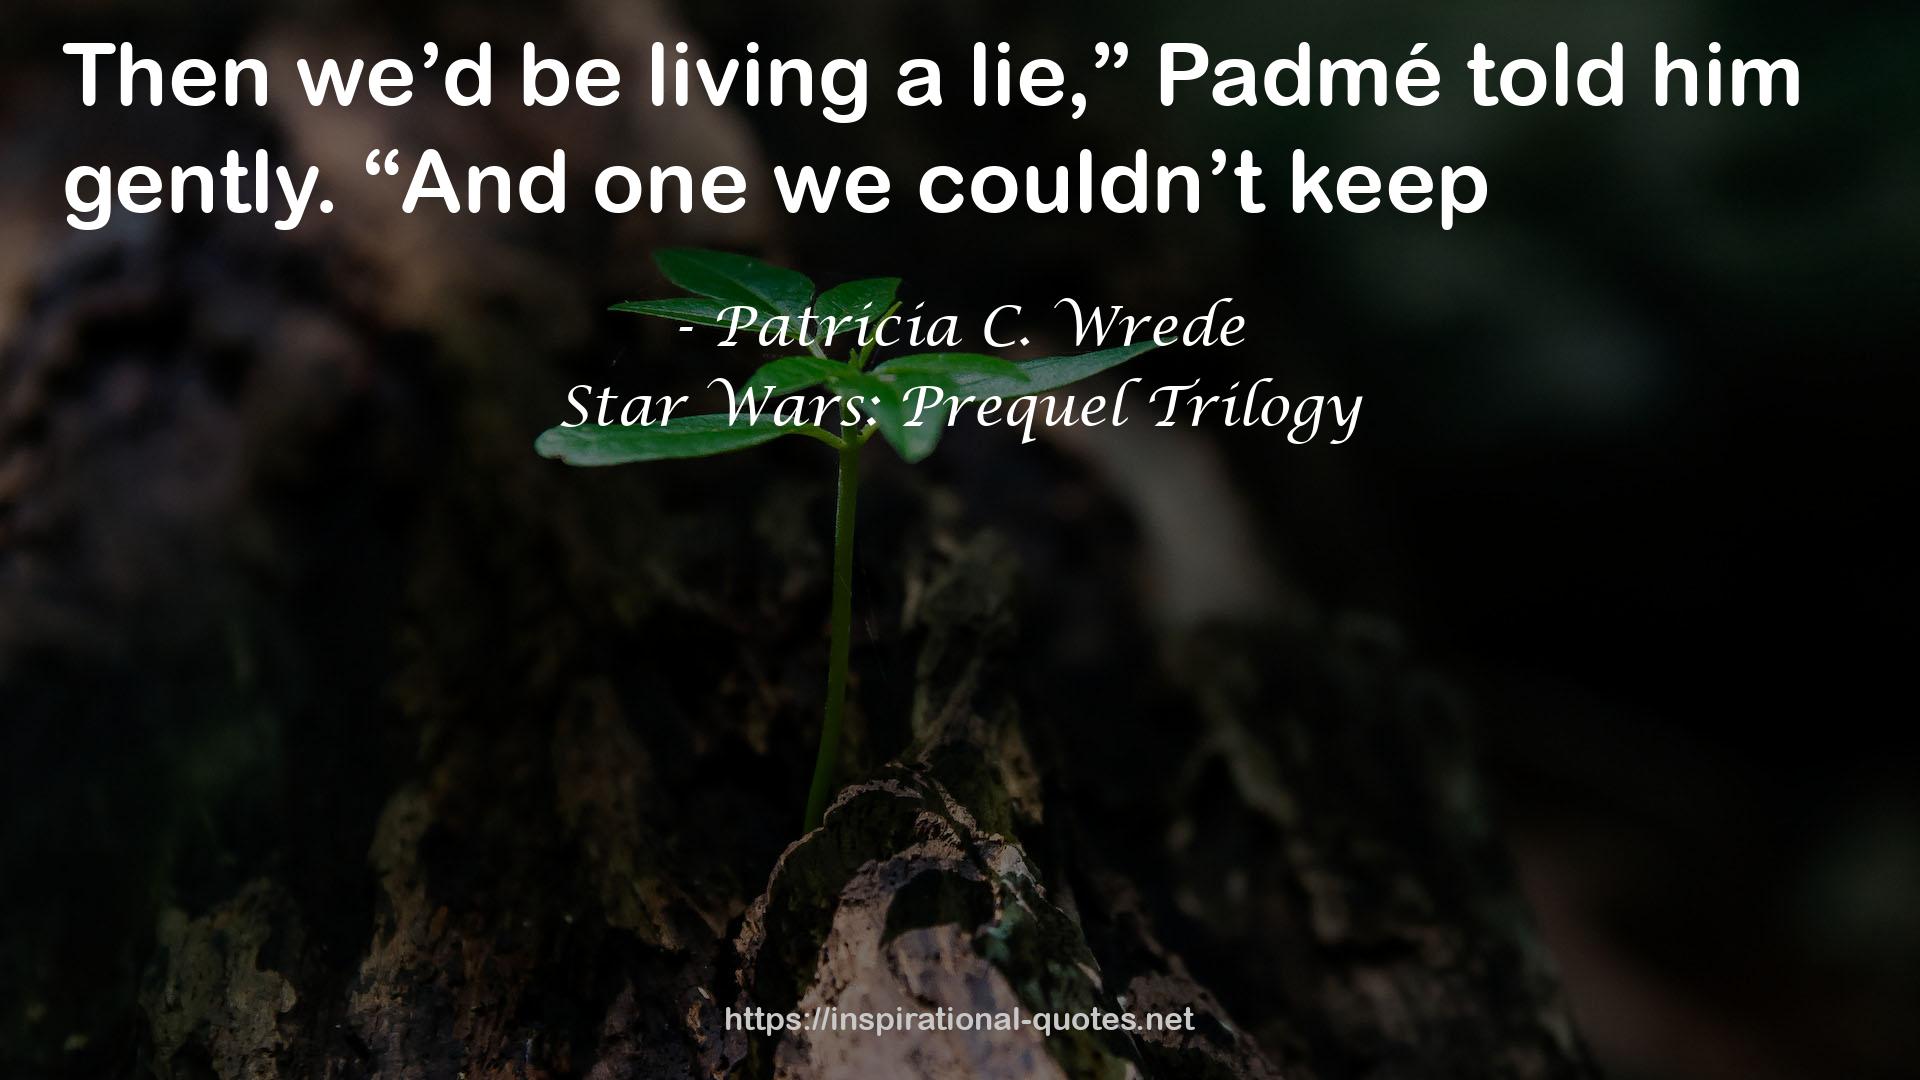 Star Wars: Prequel Trilogy QUOTES